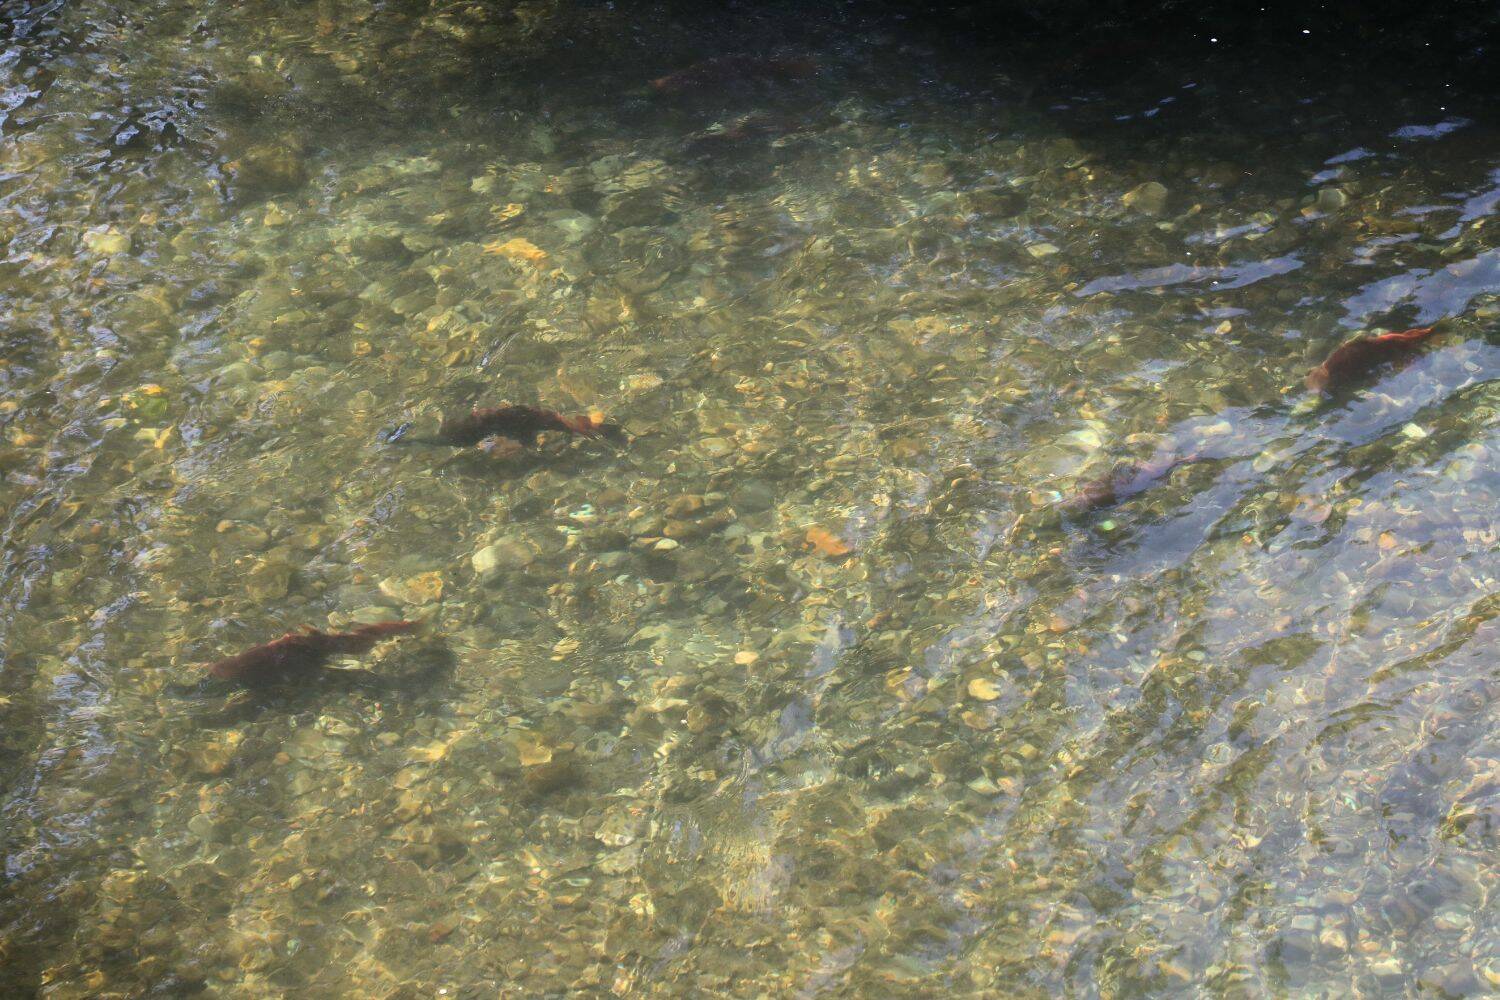 Sockeye Salmon with their morphed bodies, changed during the spawning season. (Cameron Sheppard/Sound Publishing)